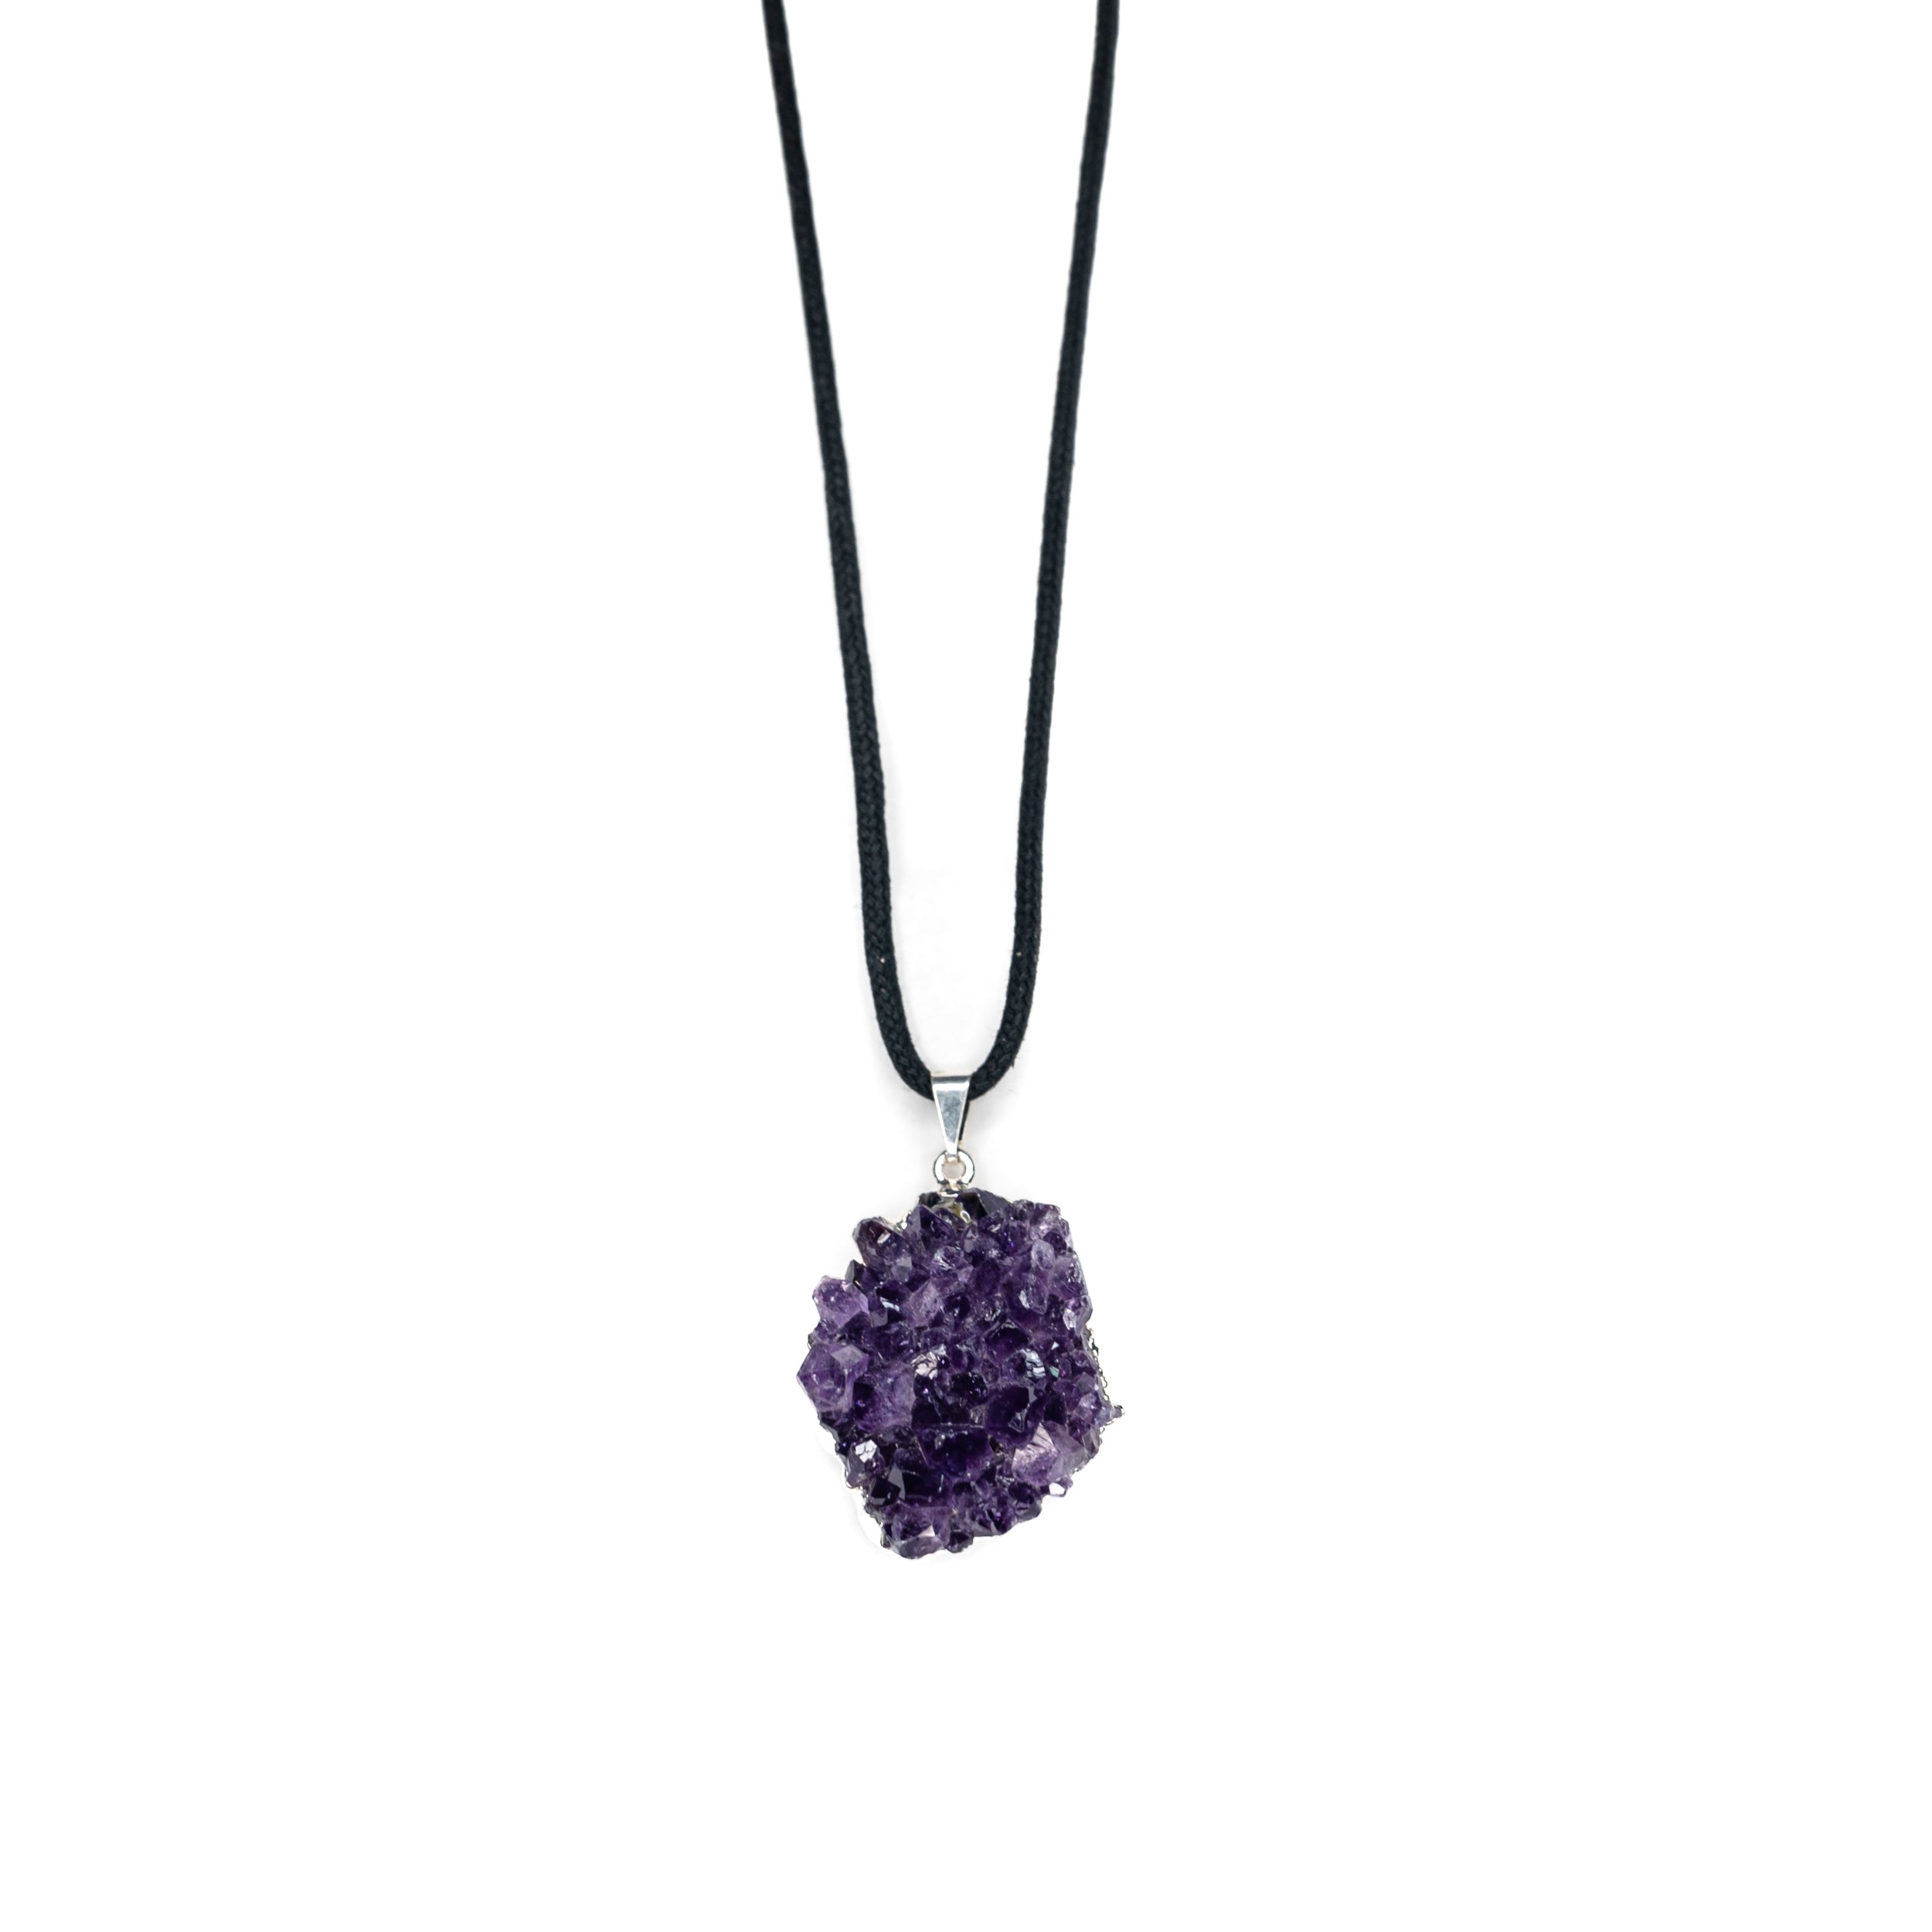 Necklace - Amethyst Cluster $40